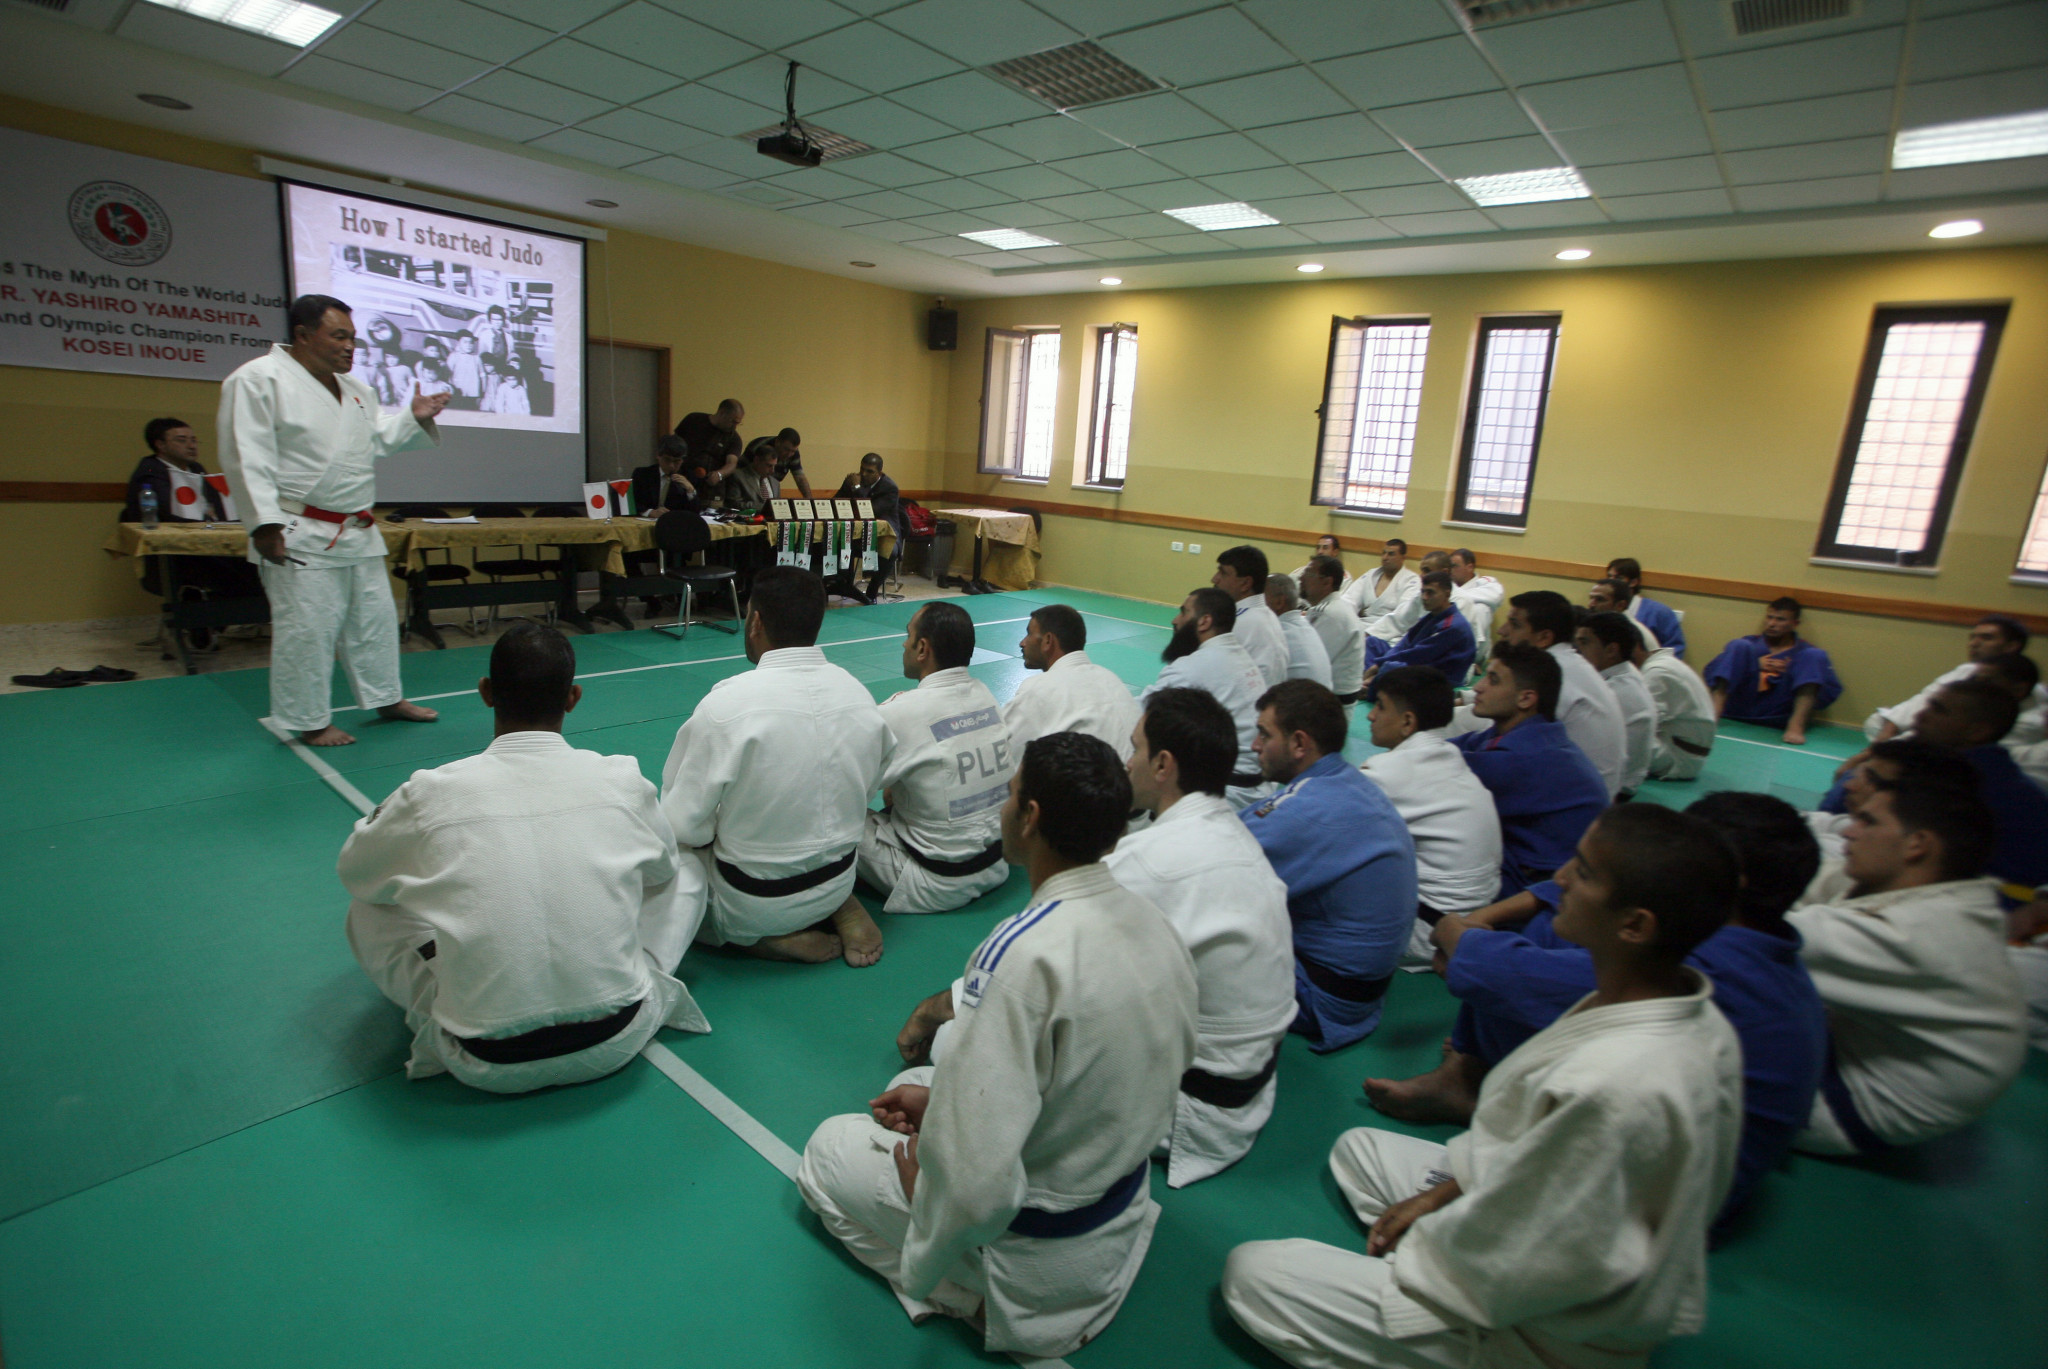 Japan's Yashiro Yamashita gives a lecture as he teaches Judo techniques to Palestinian students, members of the Judo Federation, in the biblical town of Bethlehem during his visit to the Israeli occupied Palestinian territories ©Getty Images